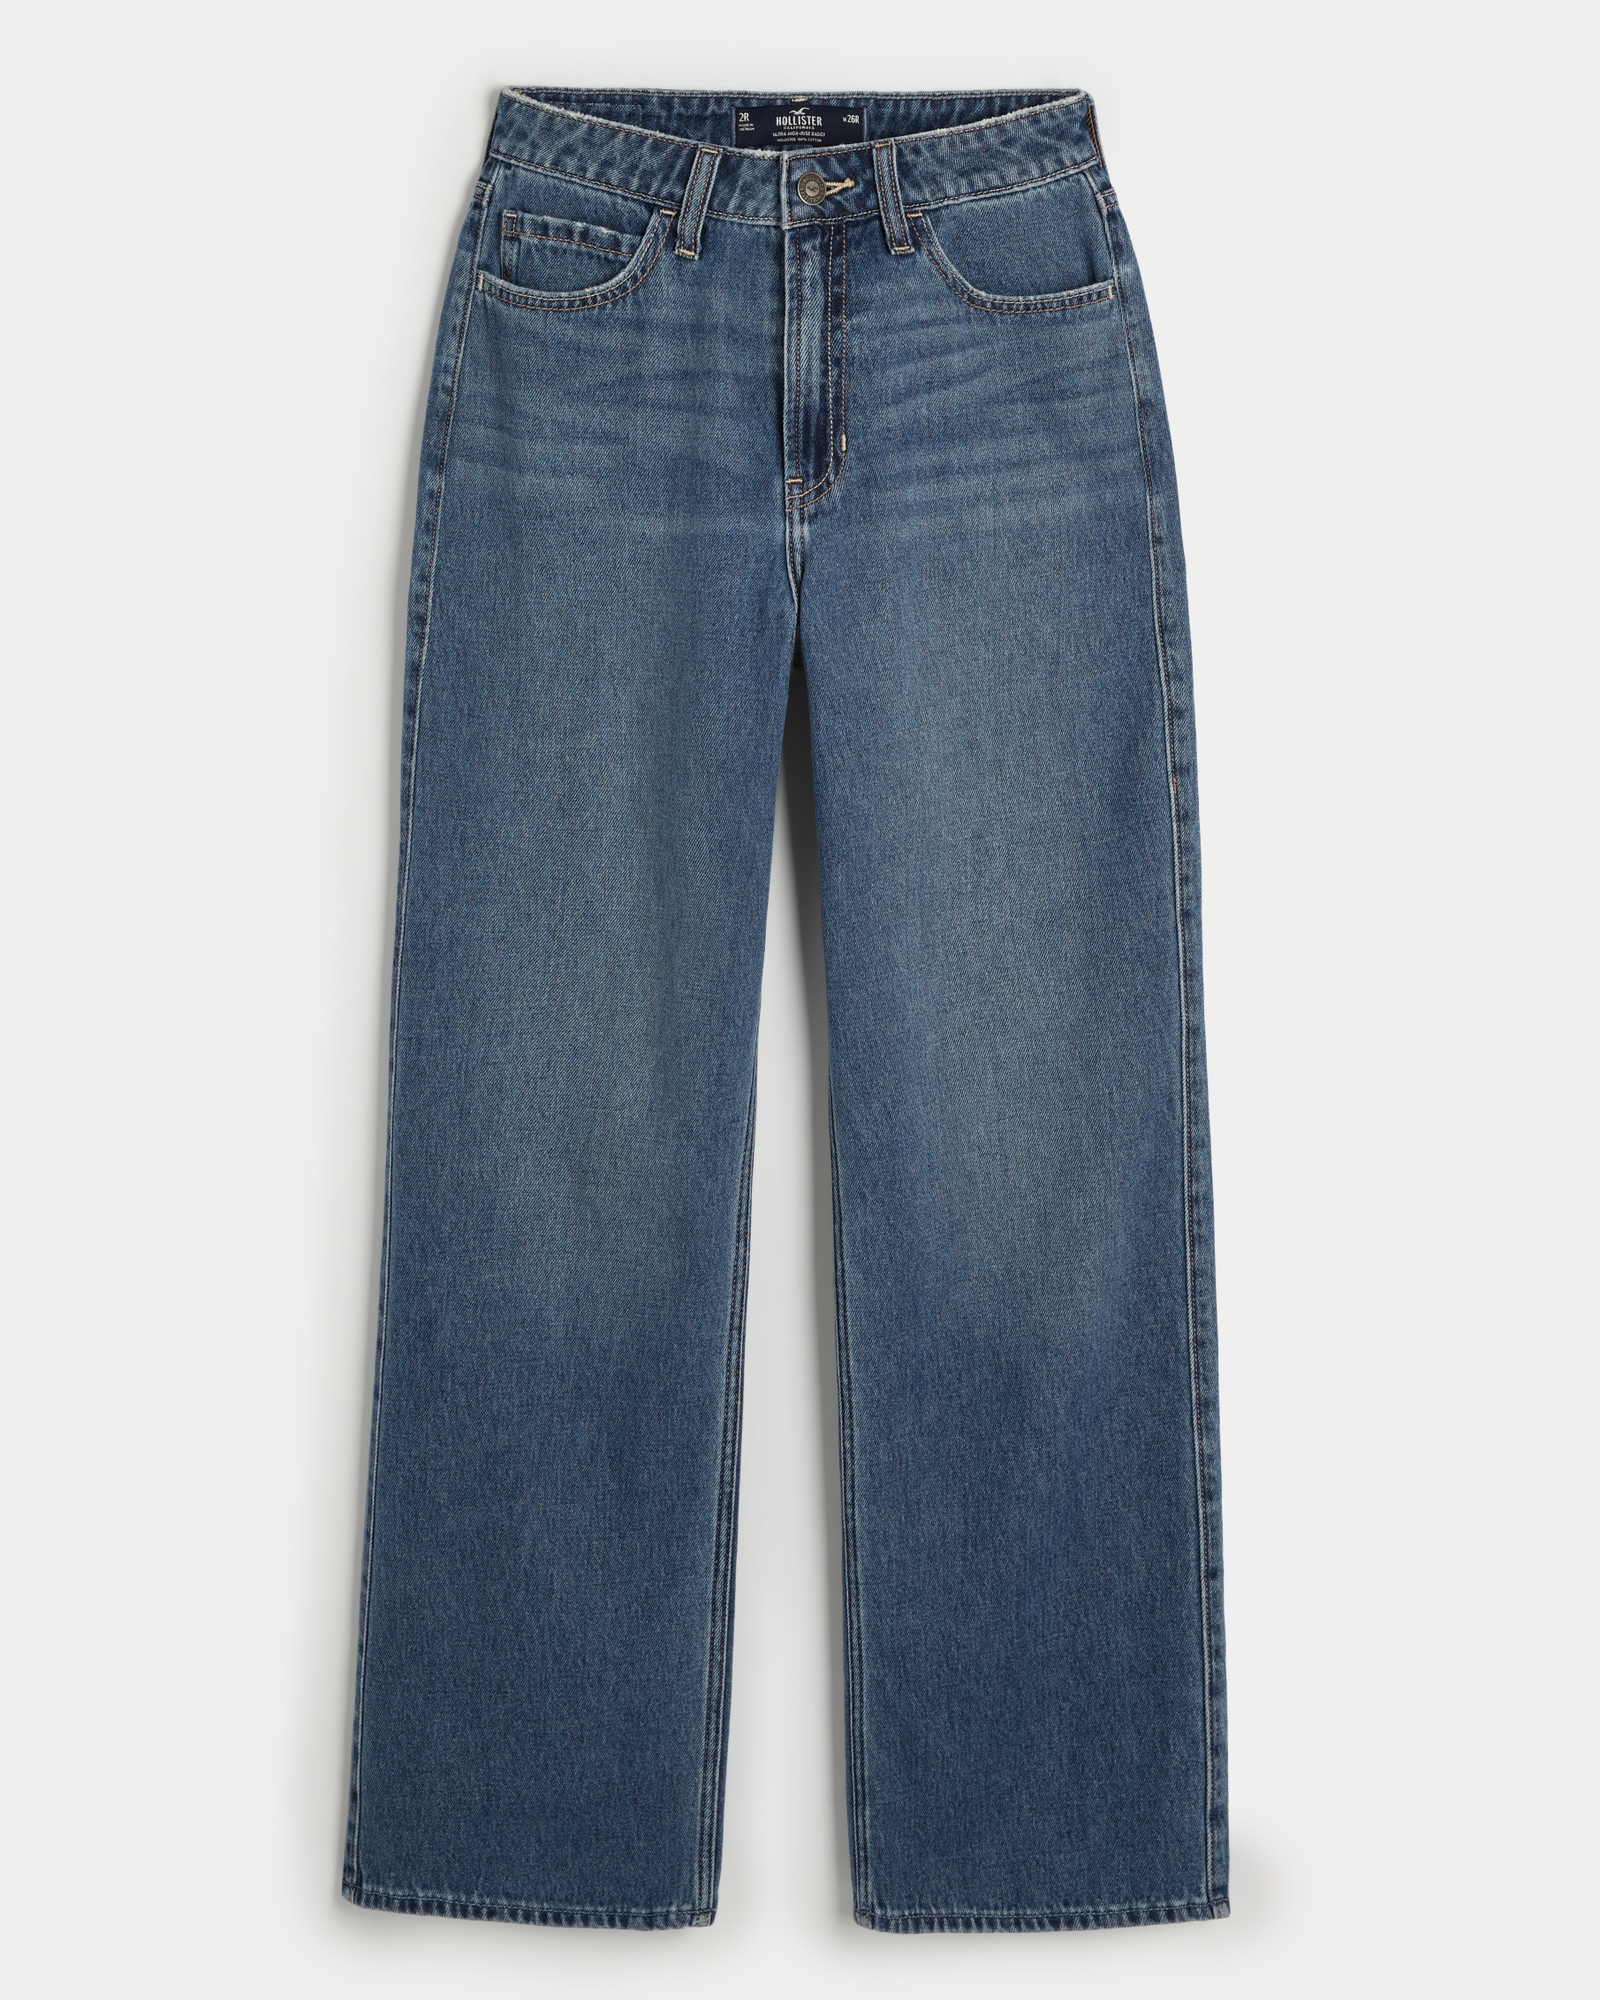 https://img.hollisterco.com/is/image/anf/KIC_355-3348-6759-276_prod1.jpg?policy=product-extra-large